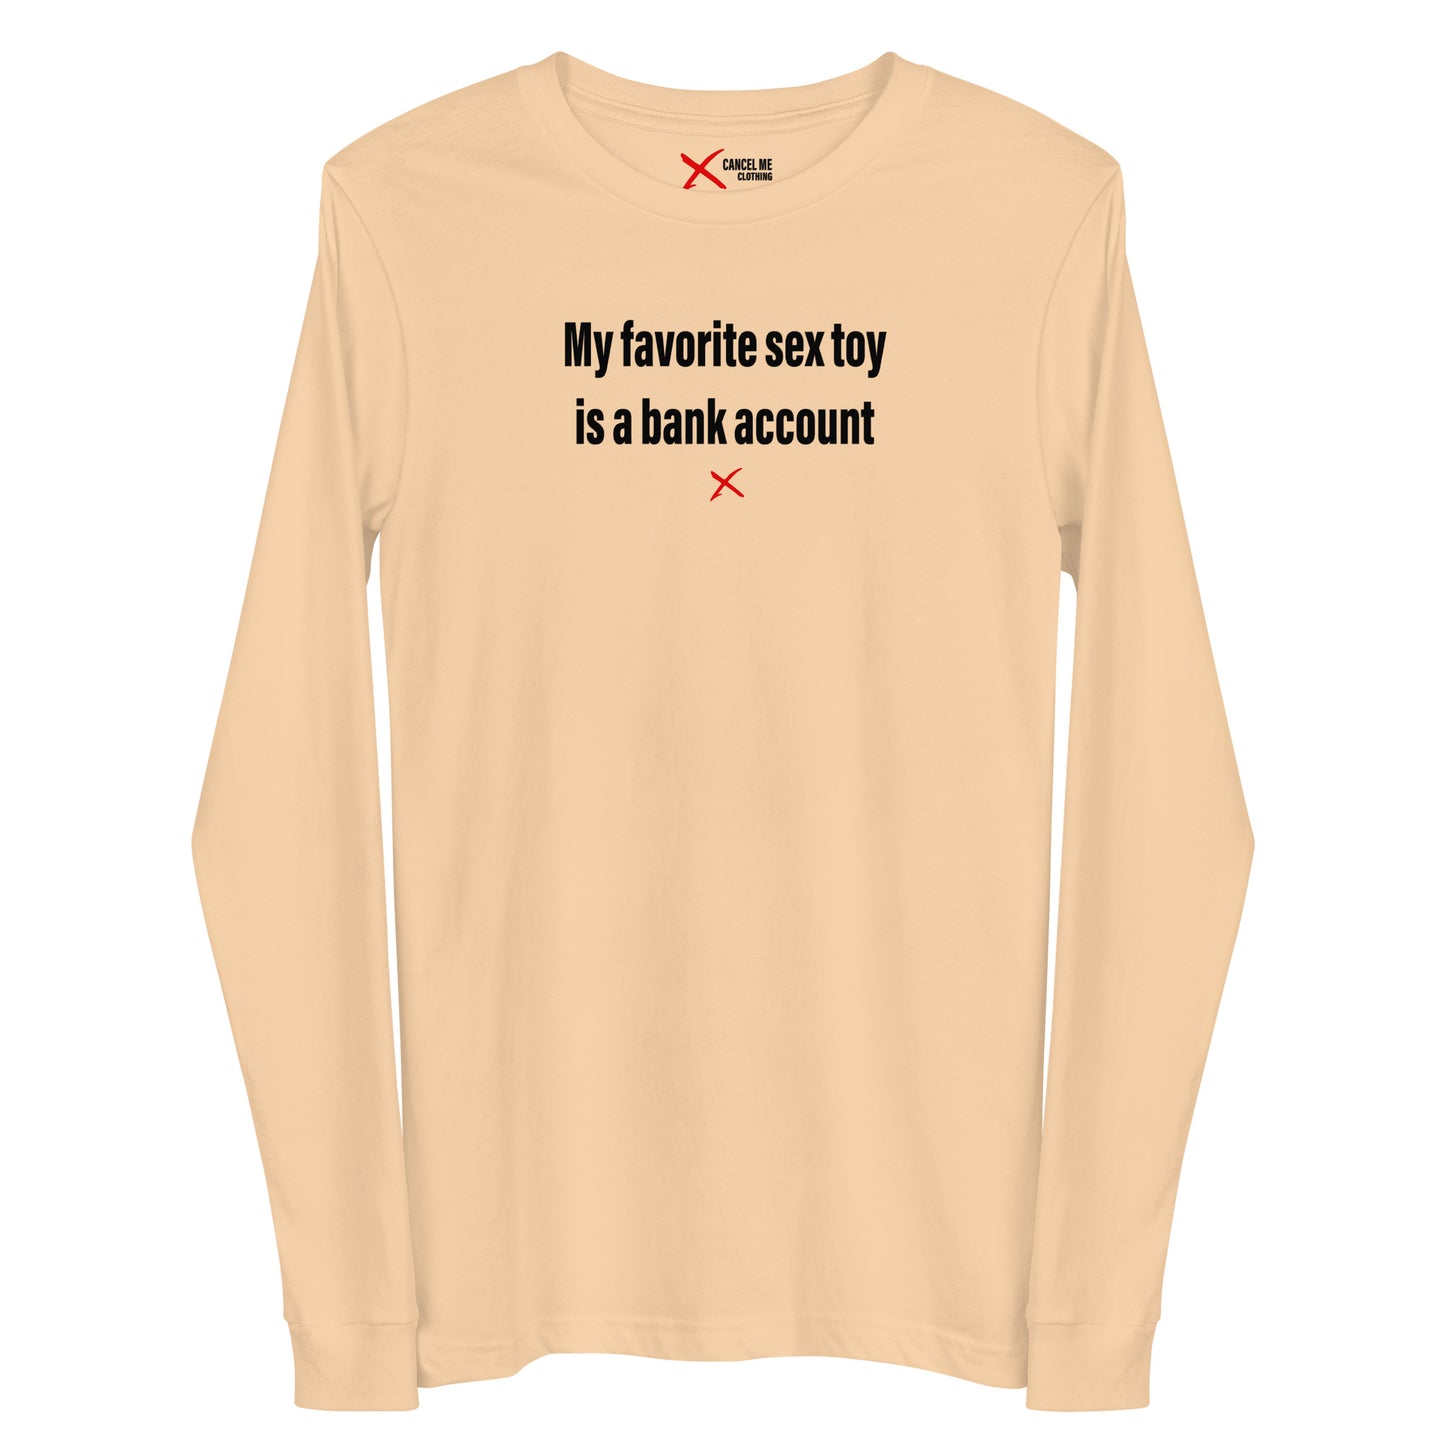 My favorite sex toy is a bank account - Longsleeve